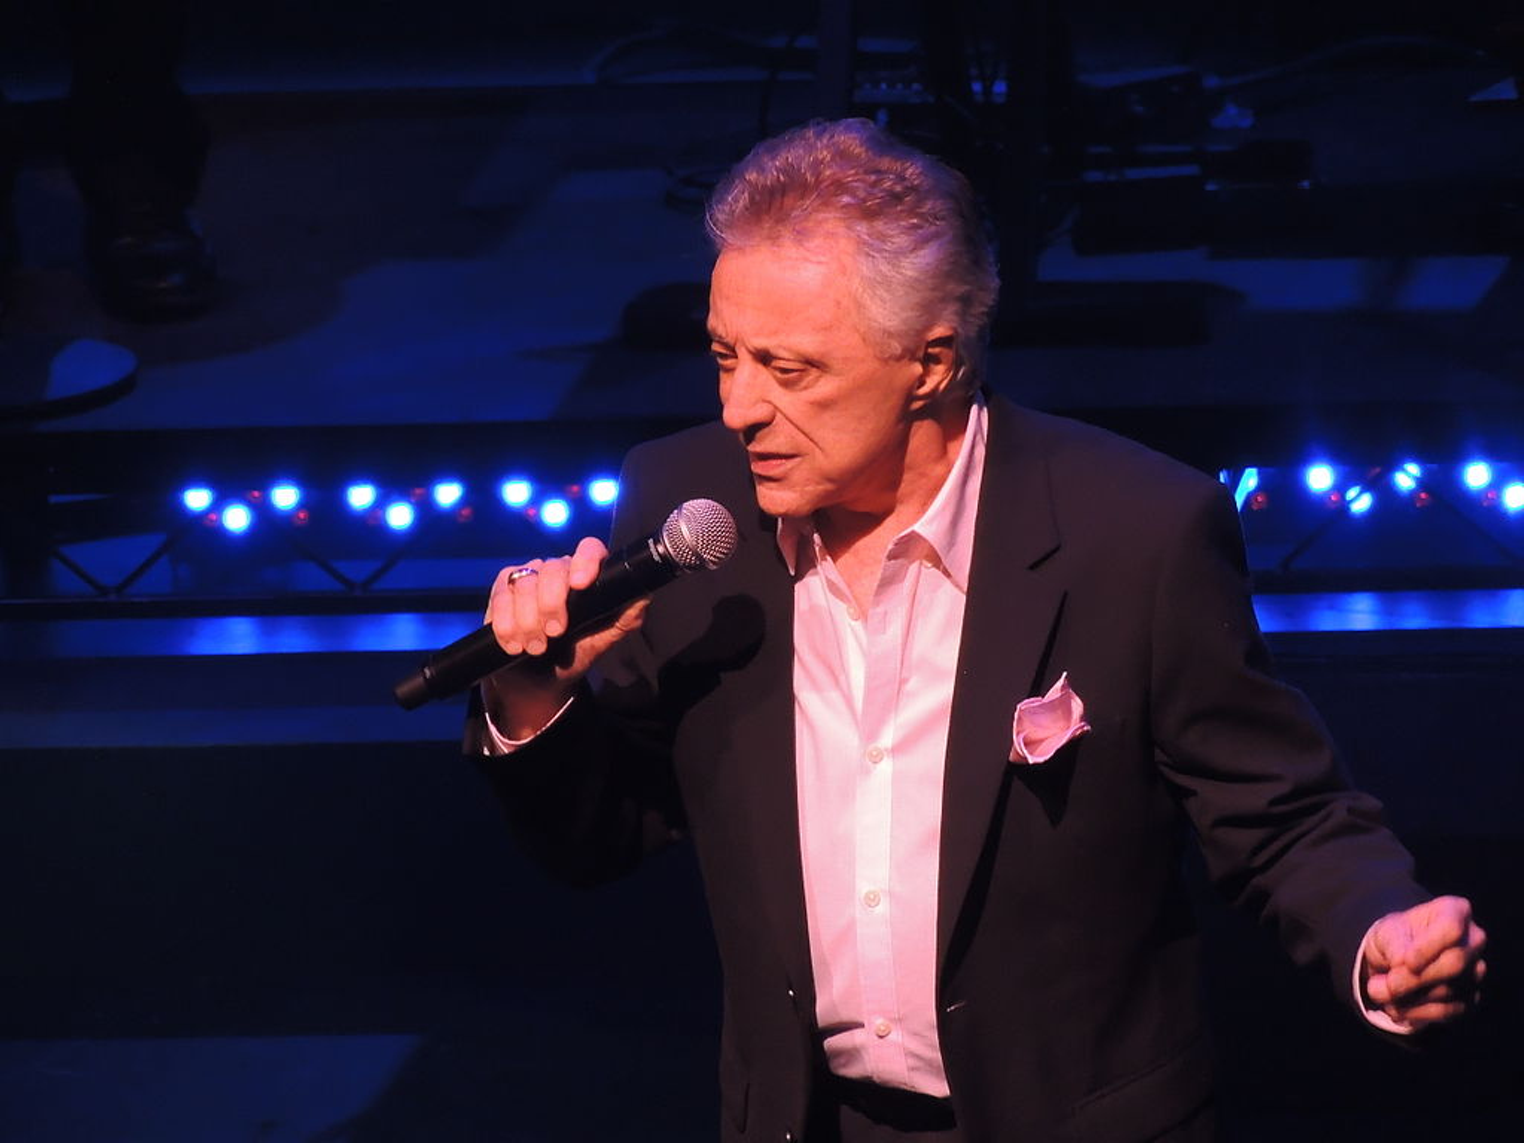 Pakistan ildsted Udpakning Frankie Valli is Coming to the Valley | Phoenix New Times